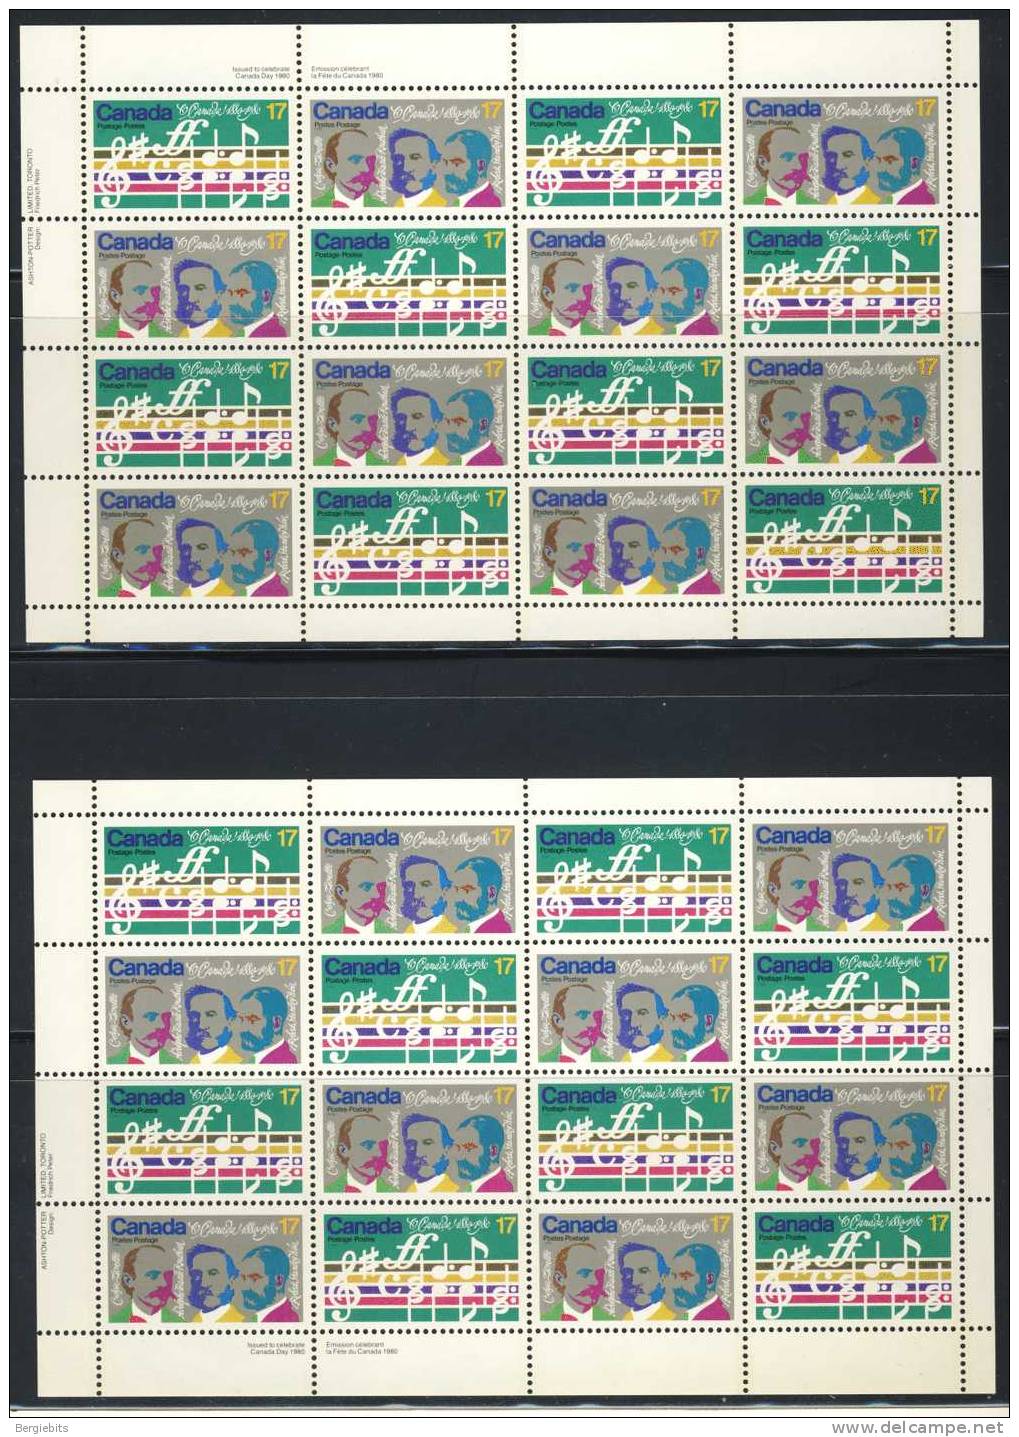 1980 Canada  Miniature Inscription Sheets Of  " O Canada National Anthem  " 64 Stamps VF MNH - Blocs-feuillets